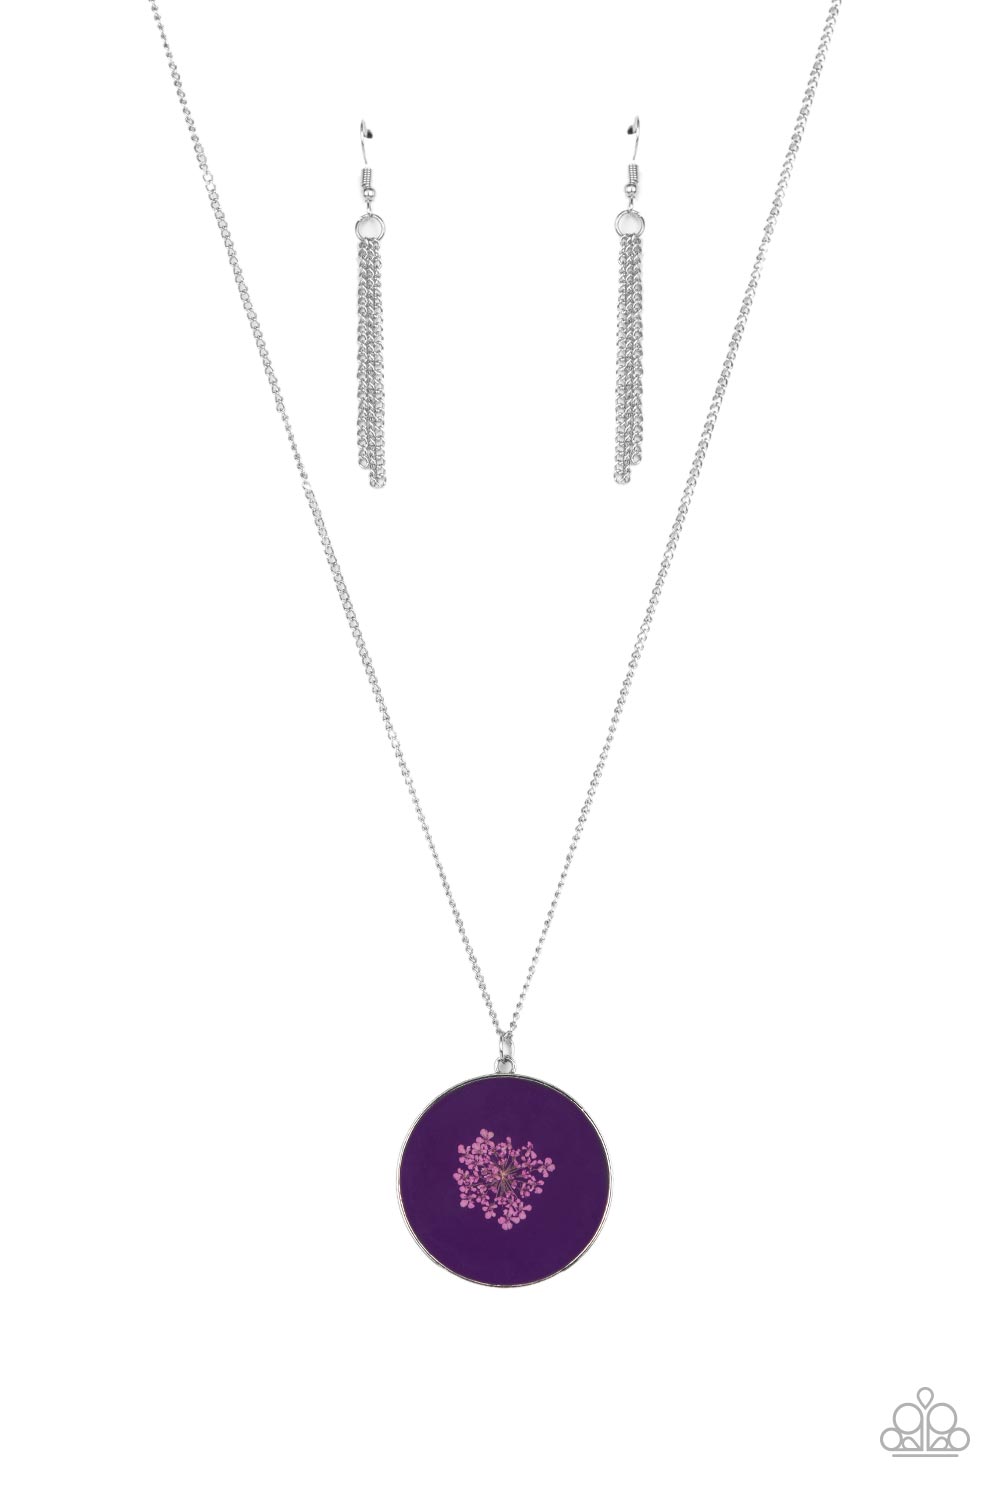 Prairie Picnic Paparazzi Accessories Necklace with Earrings - Purple